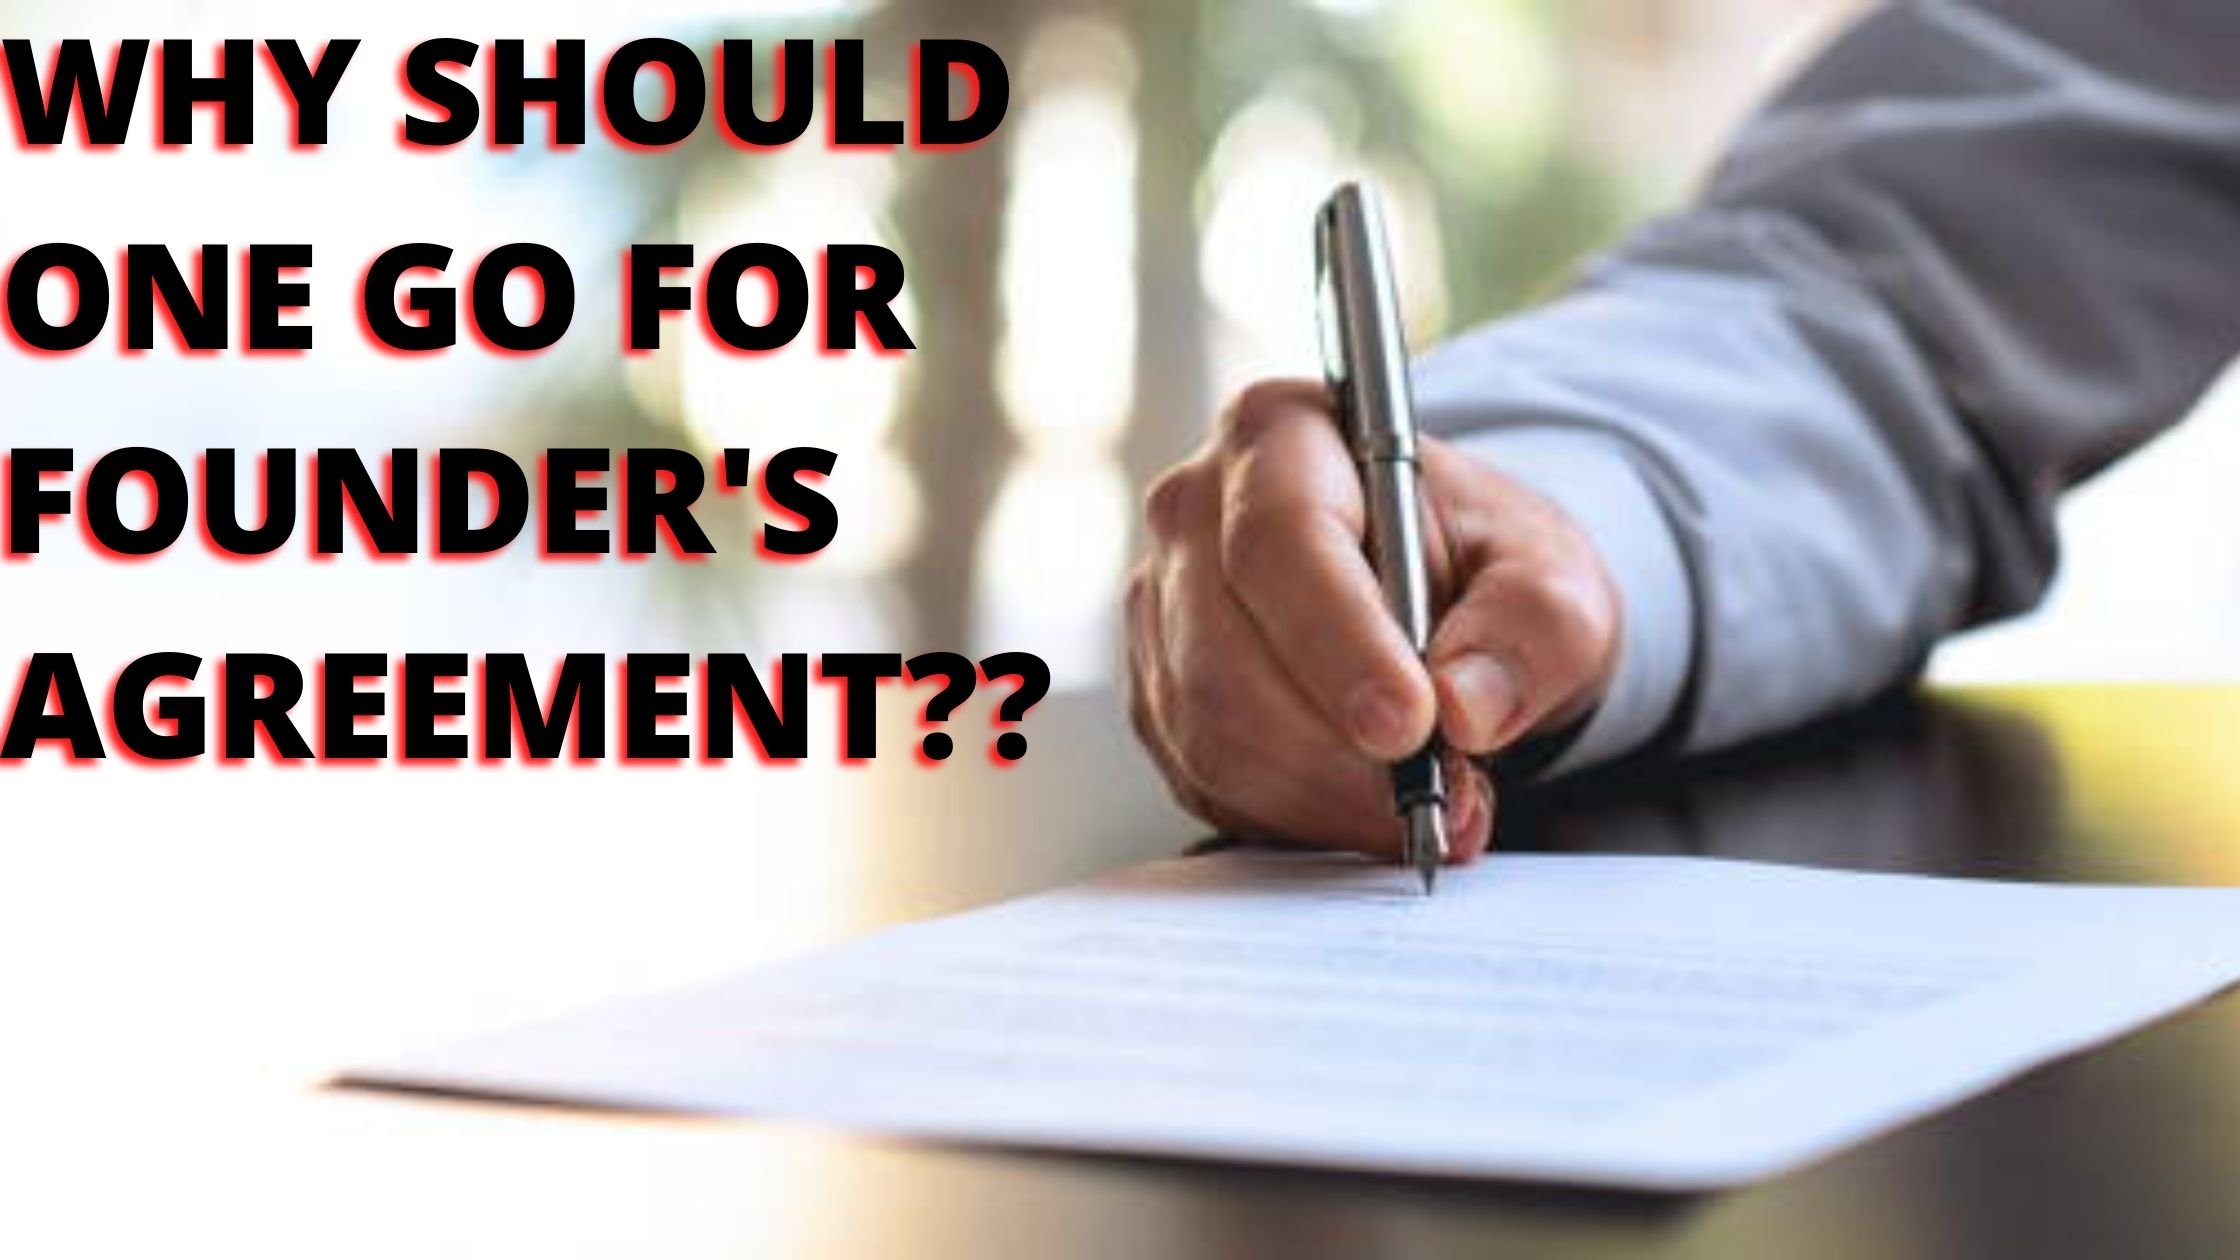 Why should one go for Founder’s Agreement?